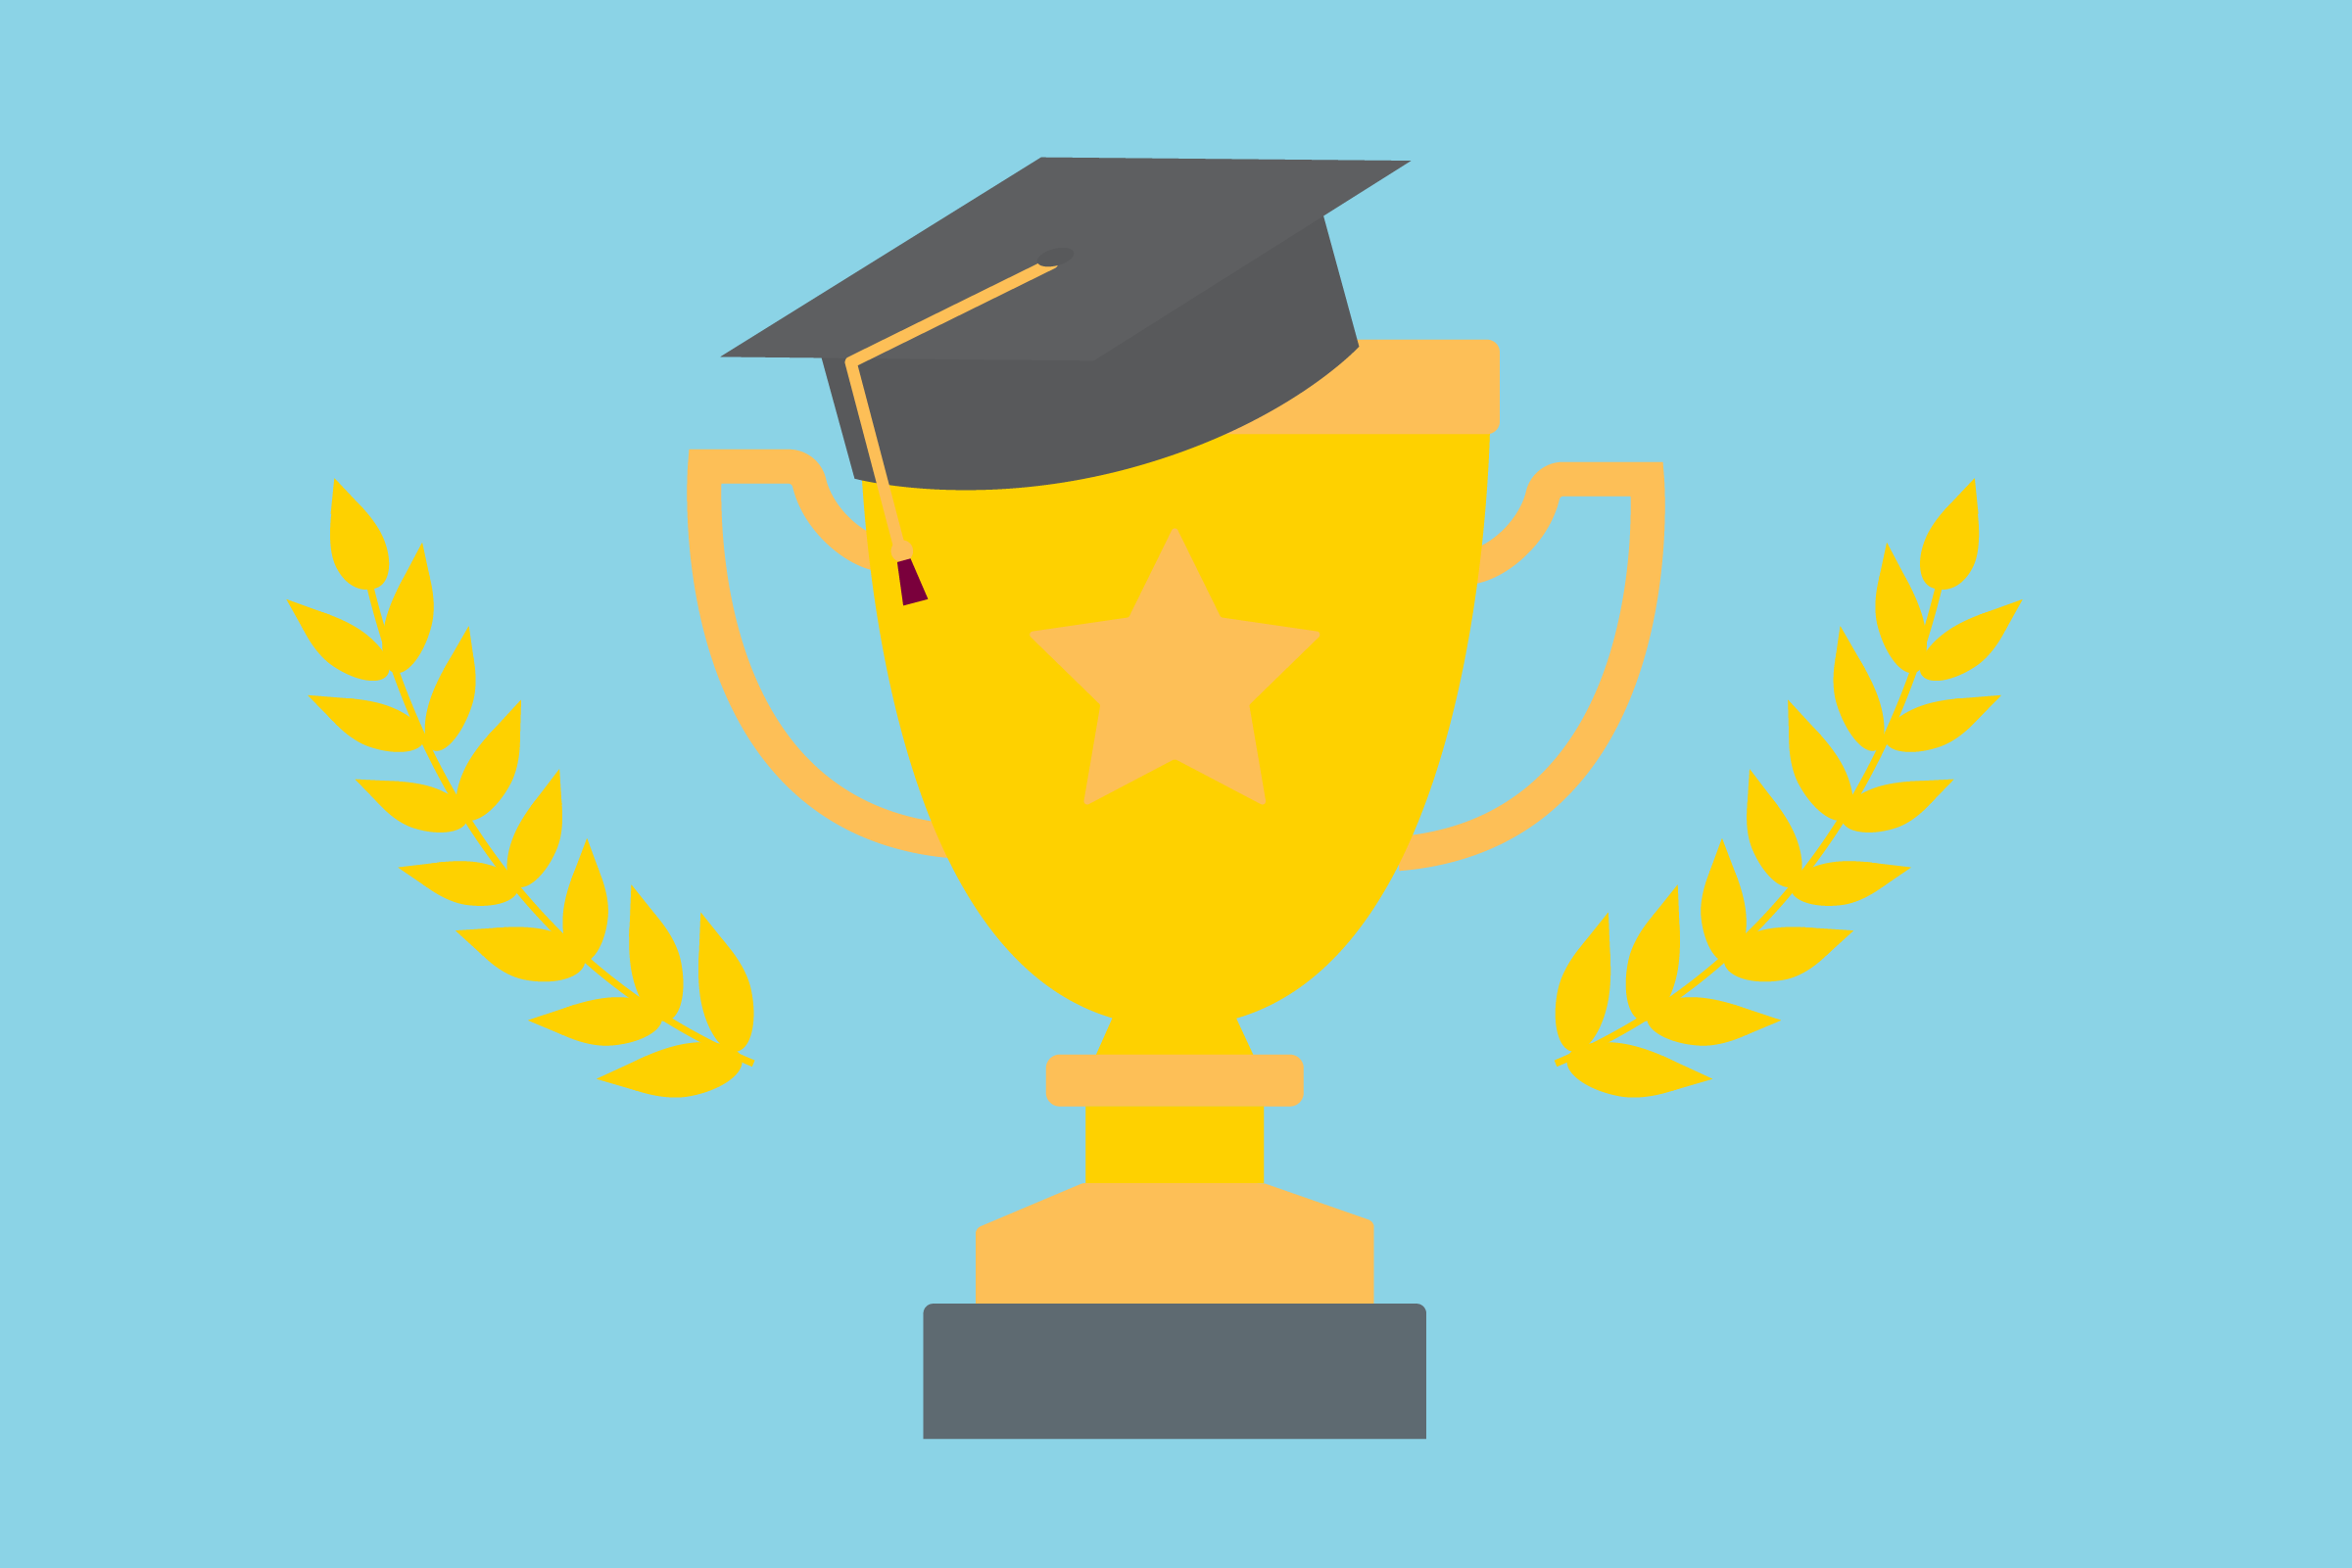 Image of a trophy with a mortarboard